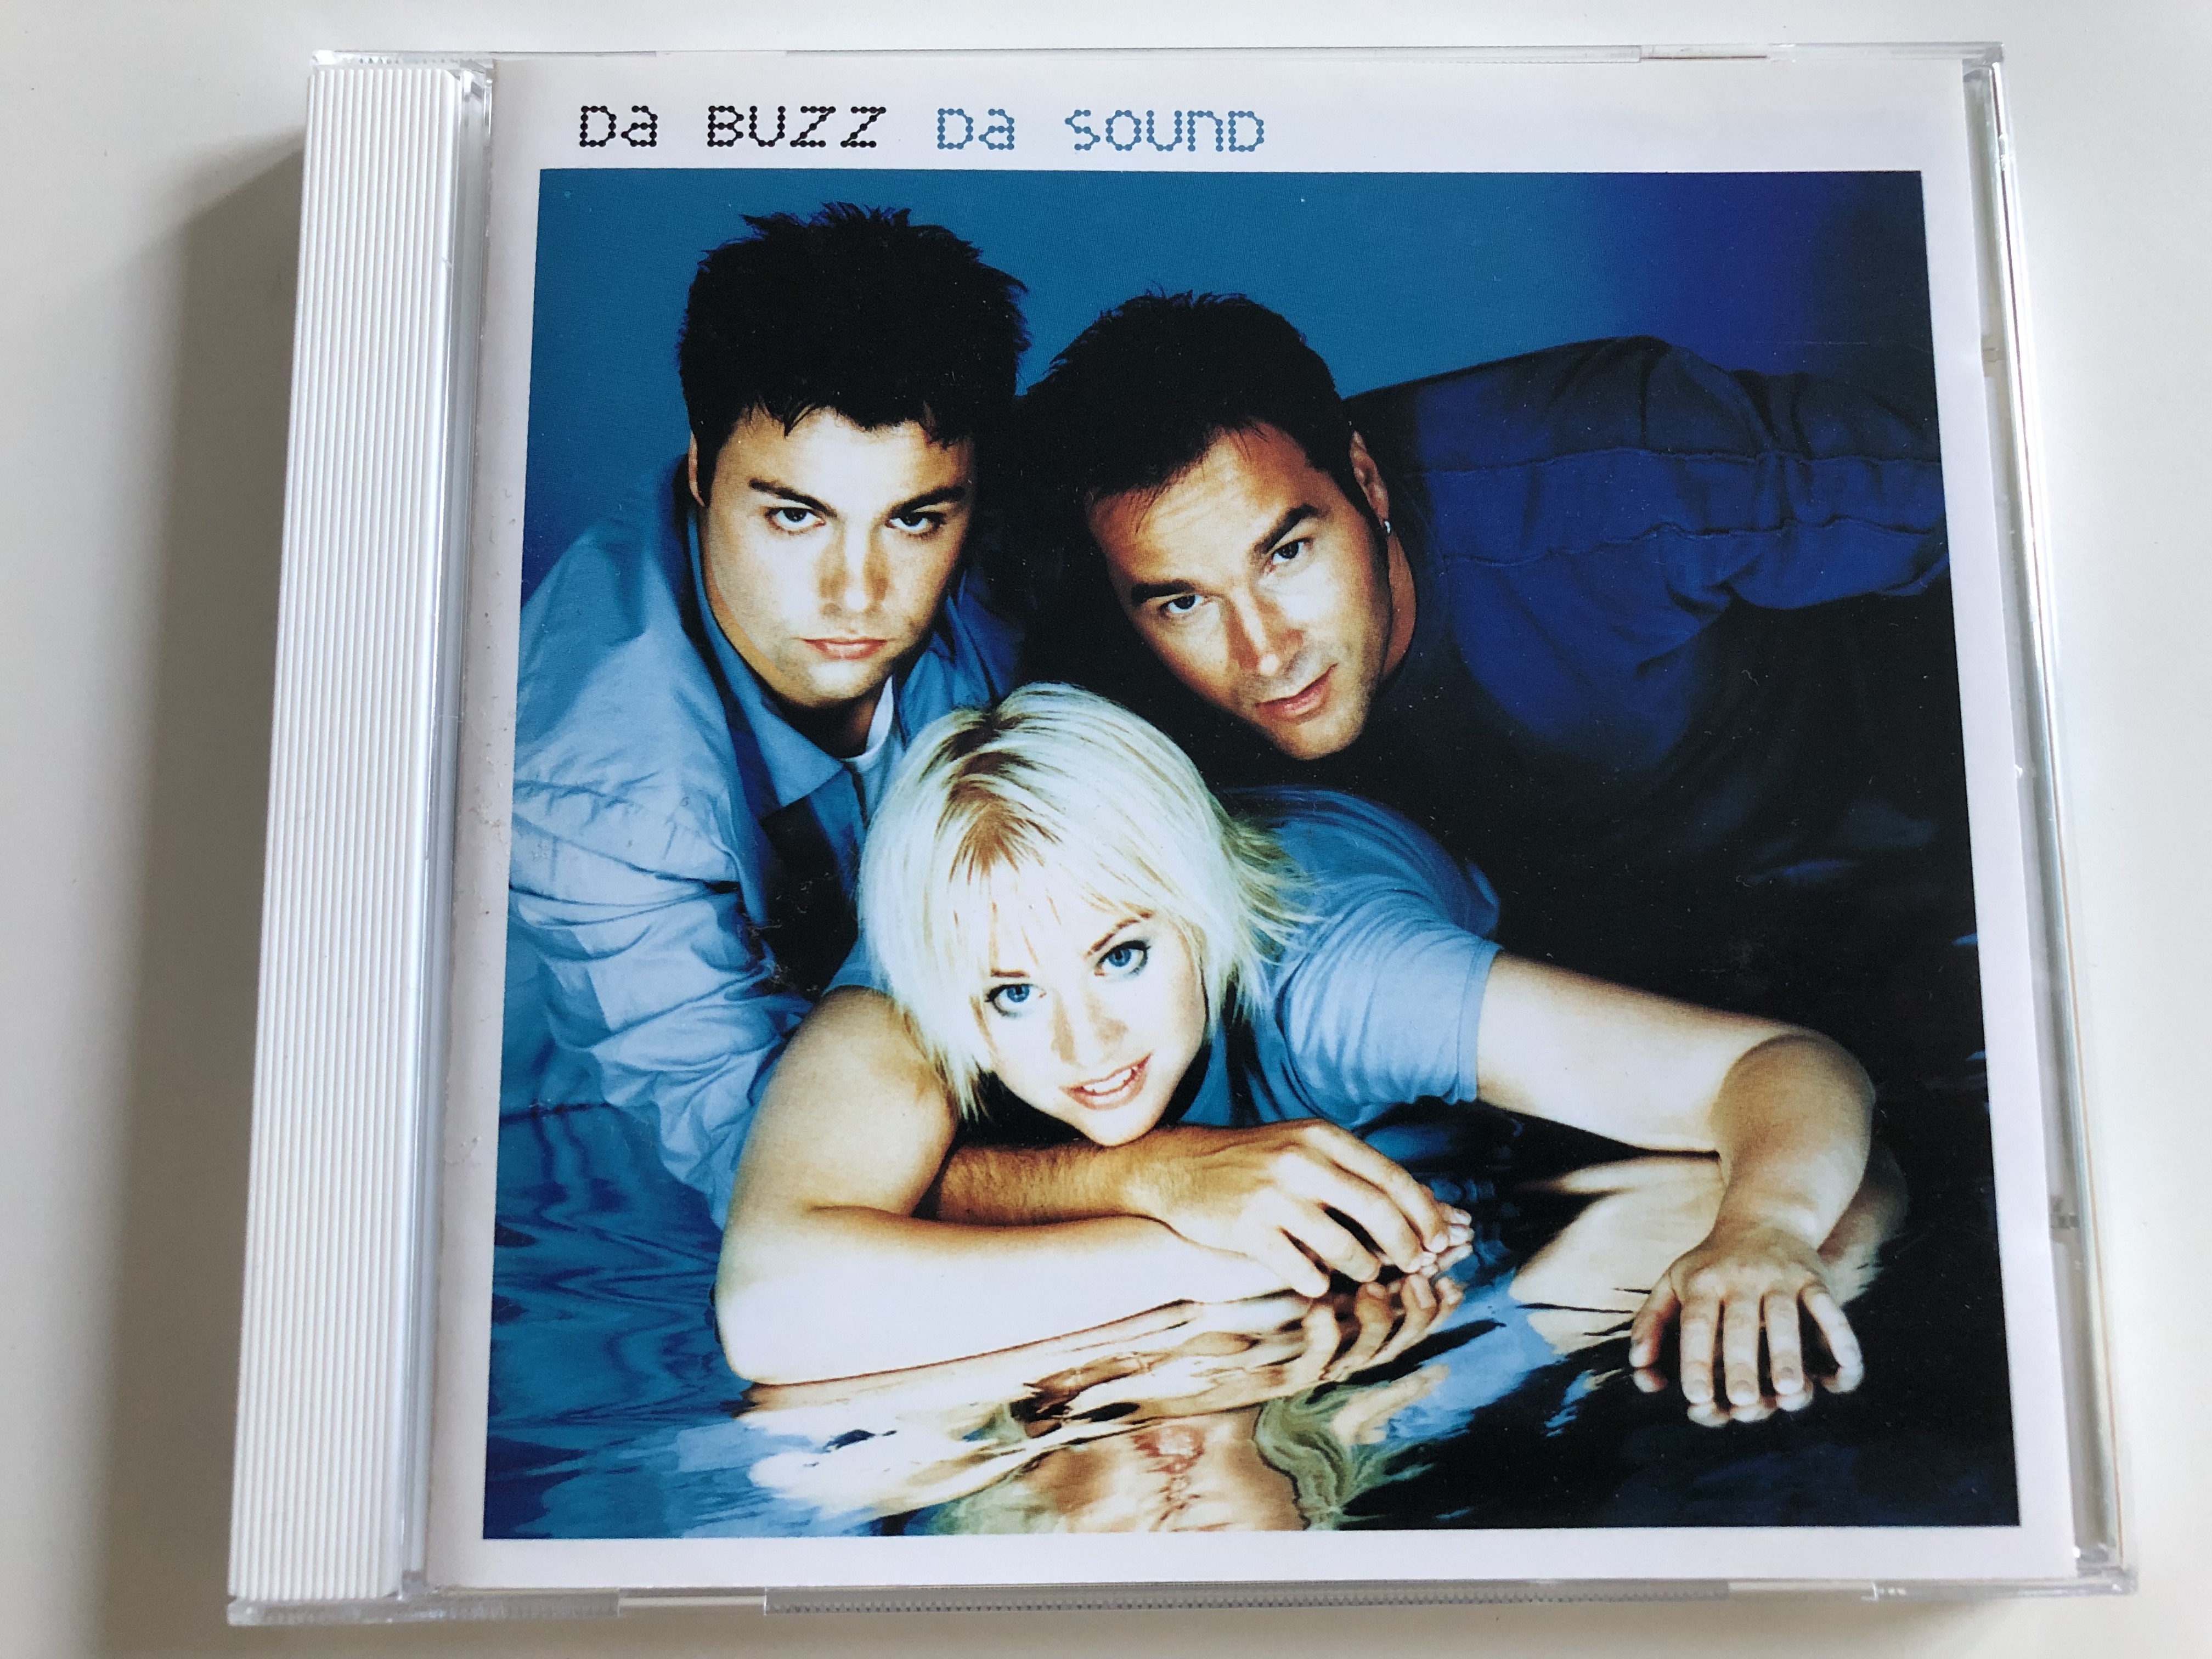 da-buzz-da-sound-let-me-love-you-paradise-tell-me-once-again-out-of-words-audio-cd-2000-edel-records-1-.jpg